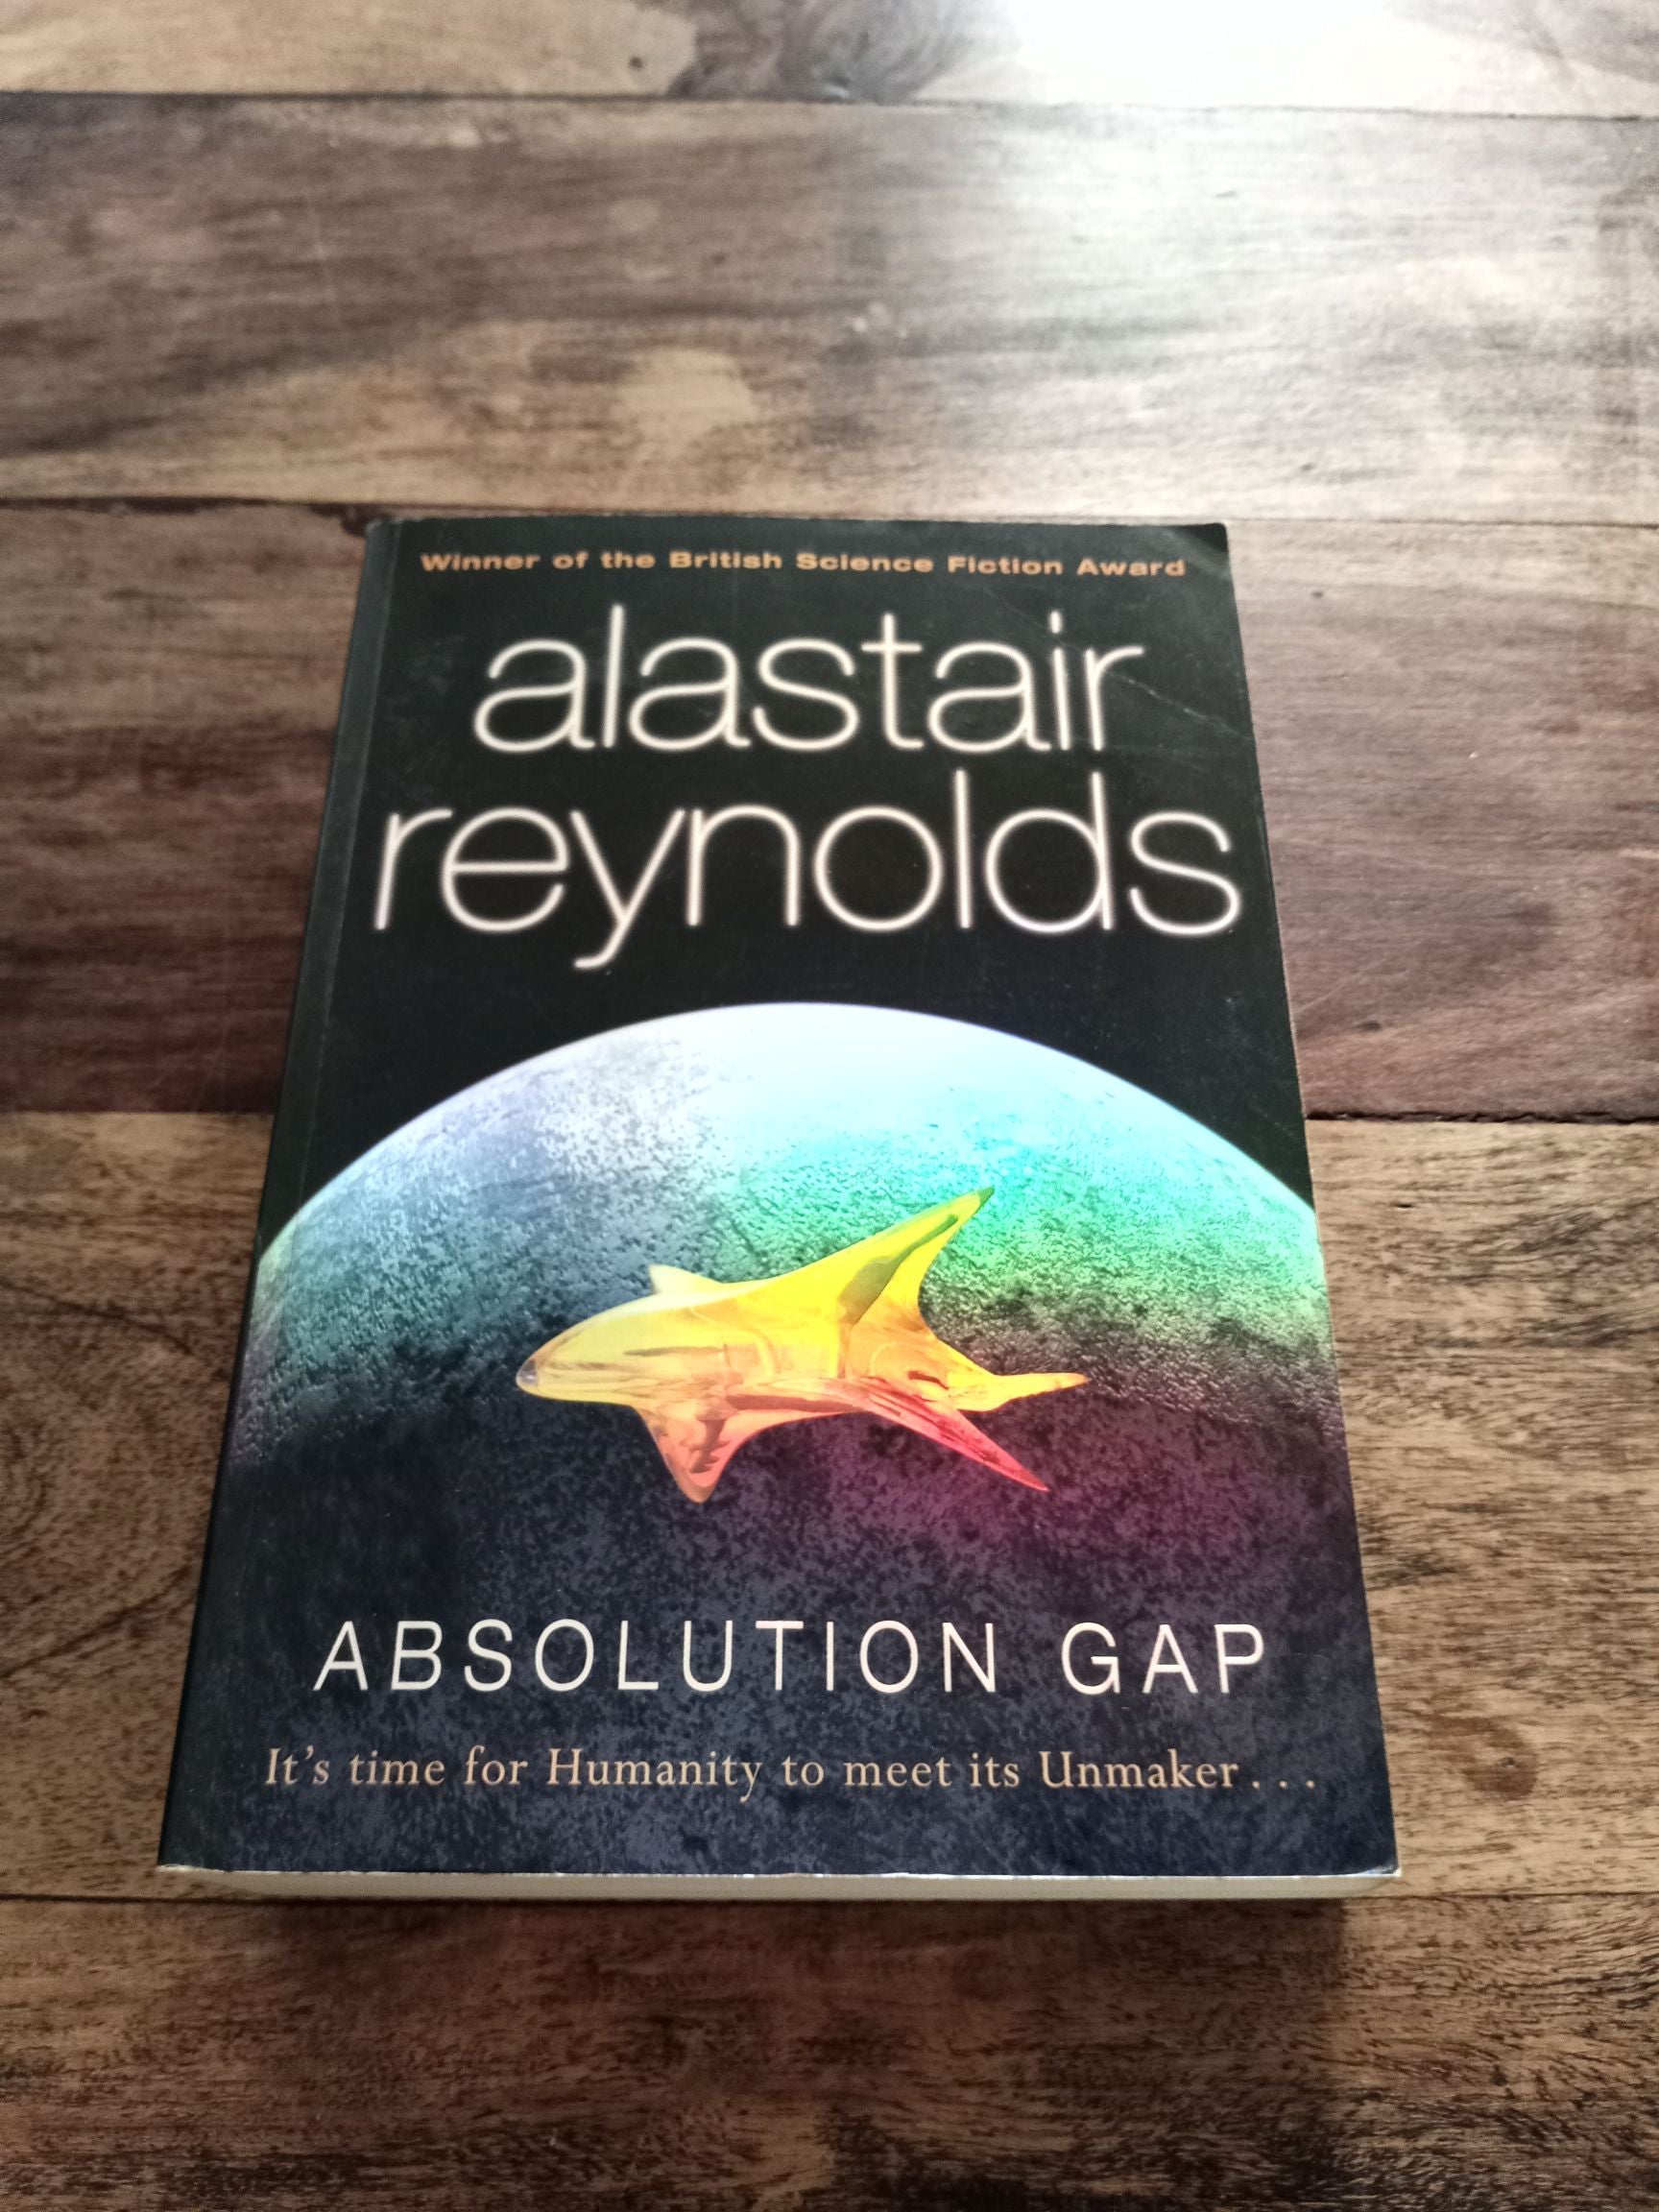 Revelation Space (Revelation Space, #1) by Alastair Reynolds